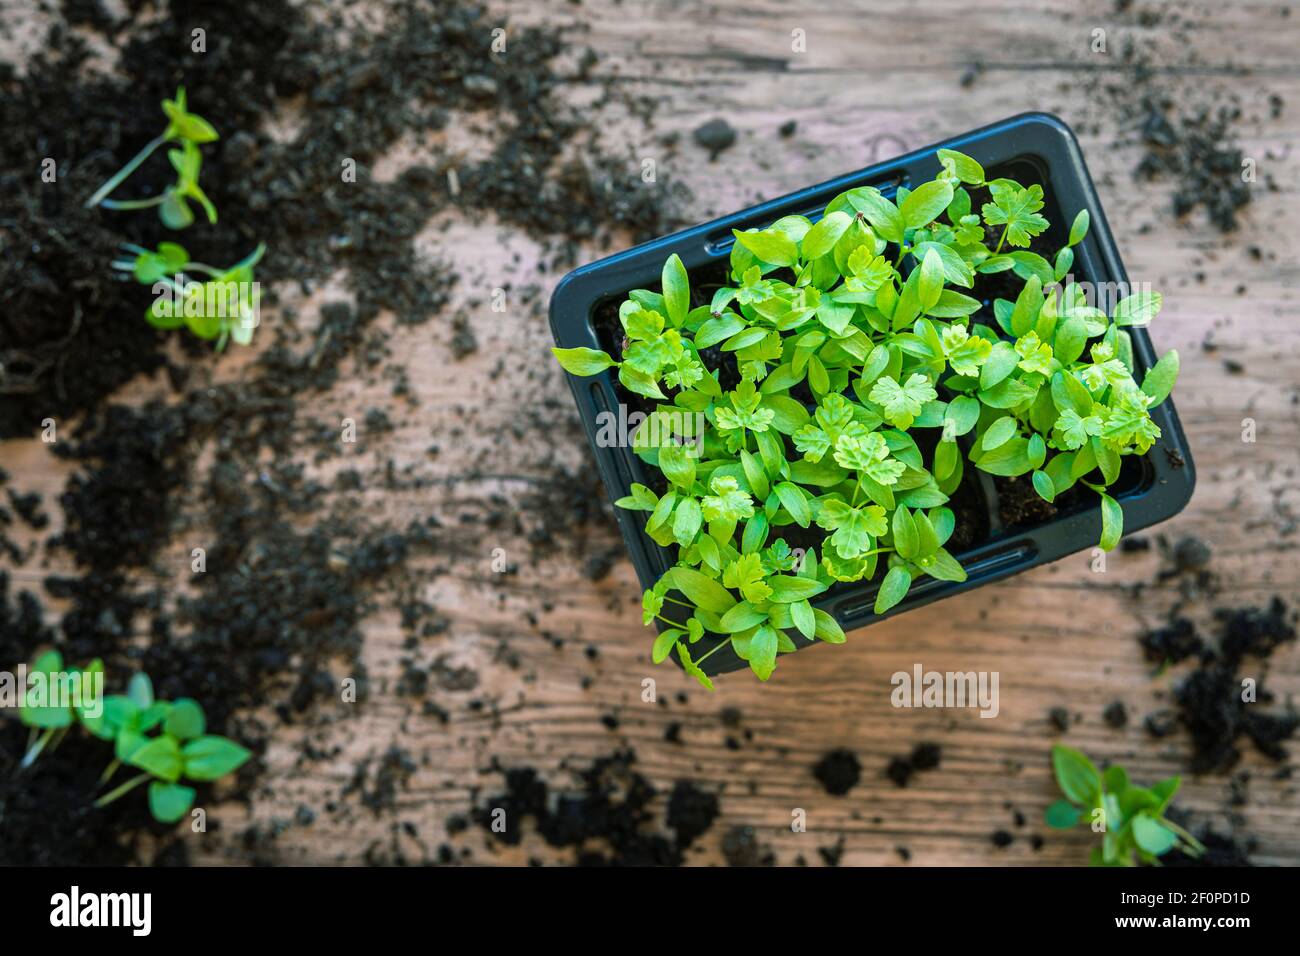 Seedlings of home grown parsley seen from above. In a box container, on a wooden table. Spring time indoors preparations for the home gardening season Stock Photo